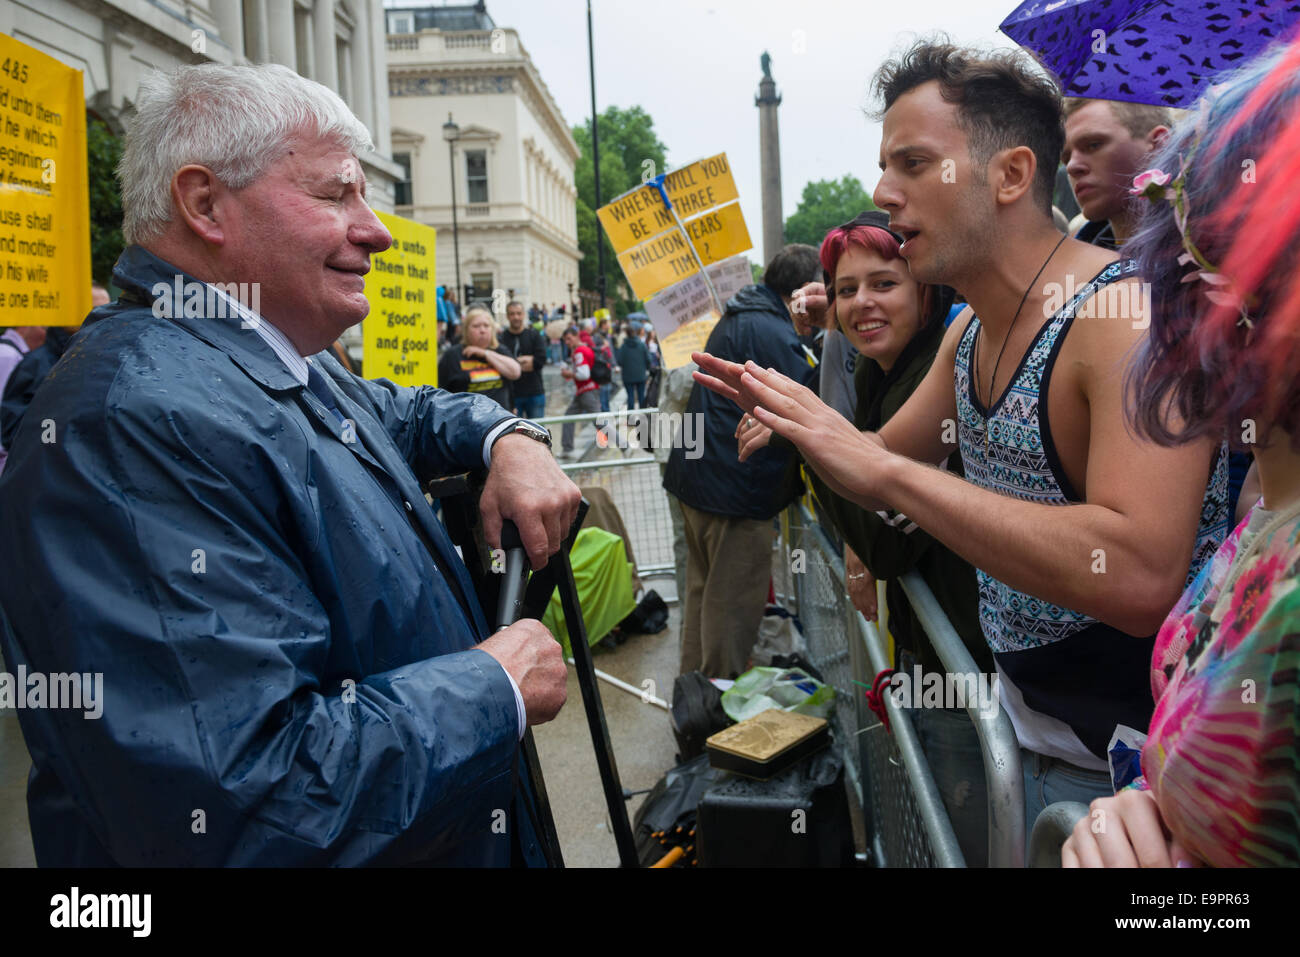 Marchers at the Pride in London parade 2014 arguing with a group of Christian anti-gay protestors on Waterloo Place, London, England Stock Photo